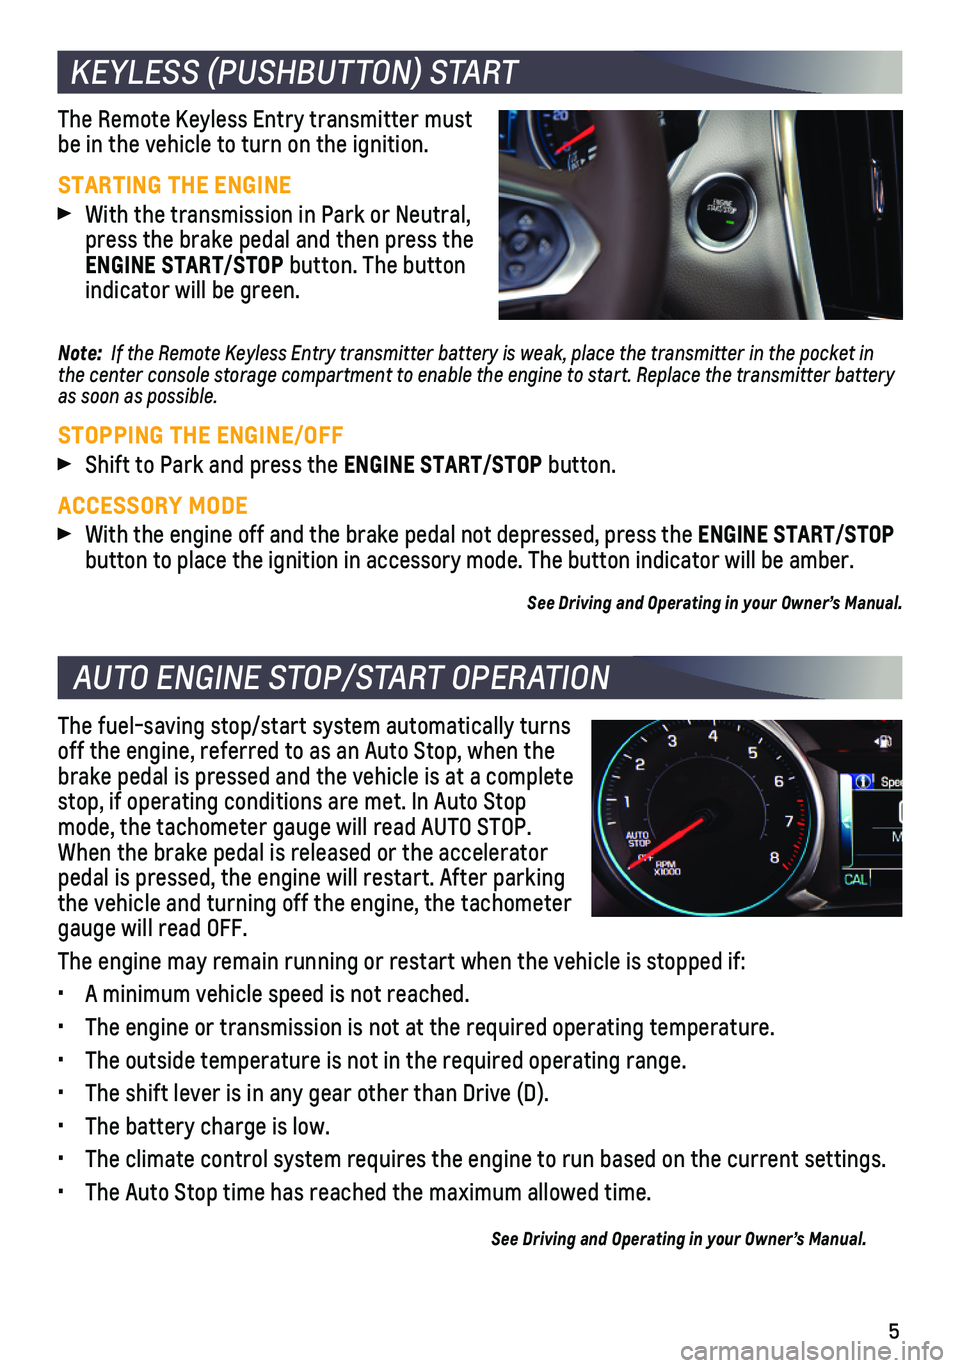 CHEVROLET TRAVERSE 2021  Get To Know Guide 5
KEYLESS (PUSHBUTTON) START
AUTO ENGINE STOP/START OPERATION 
The Remote Keyless Entry transmitter must be in the vehicle to turn on the ignition.
STARTING THE ENGINE
 With the transmission in Park o